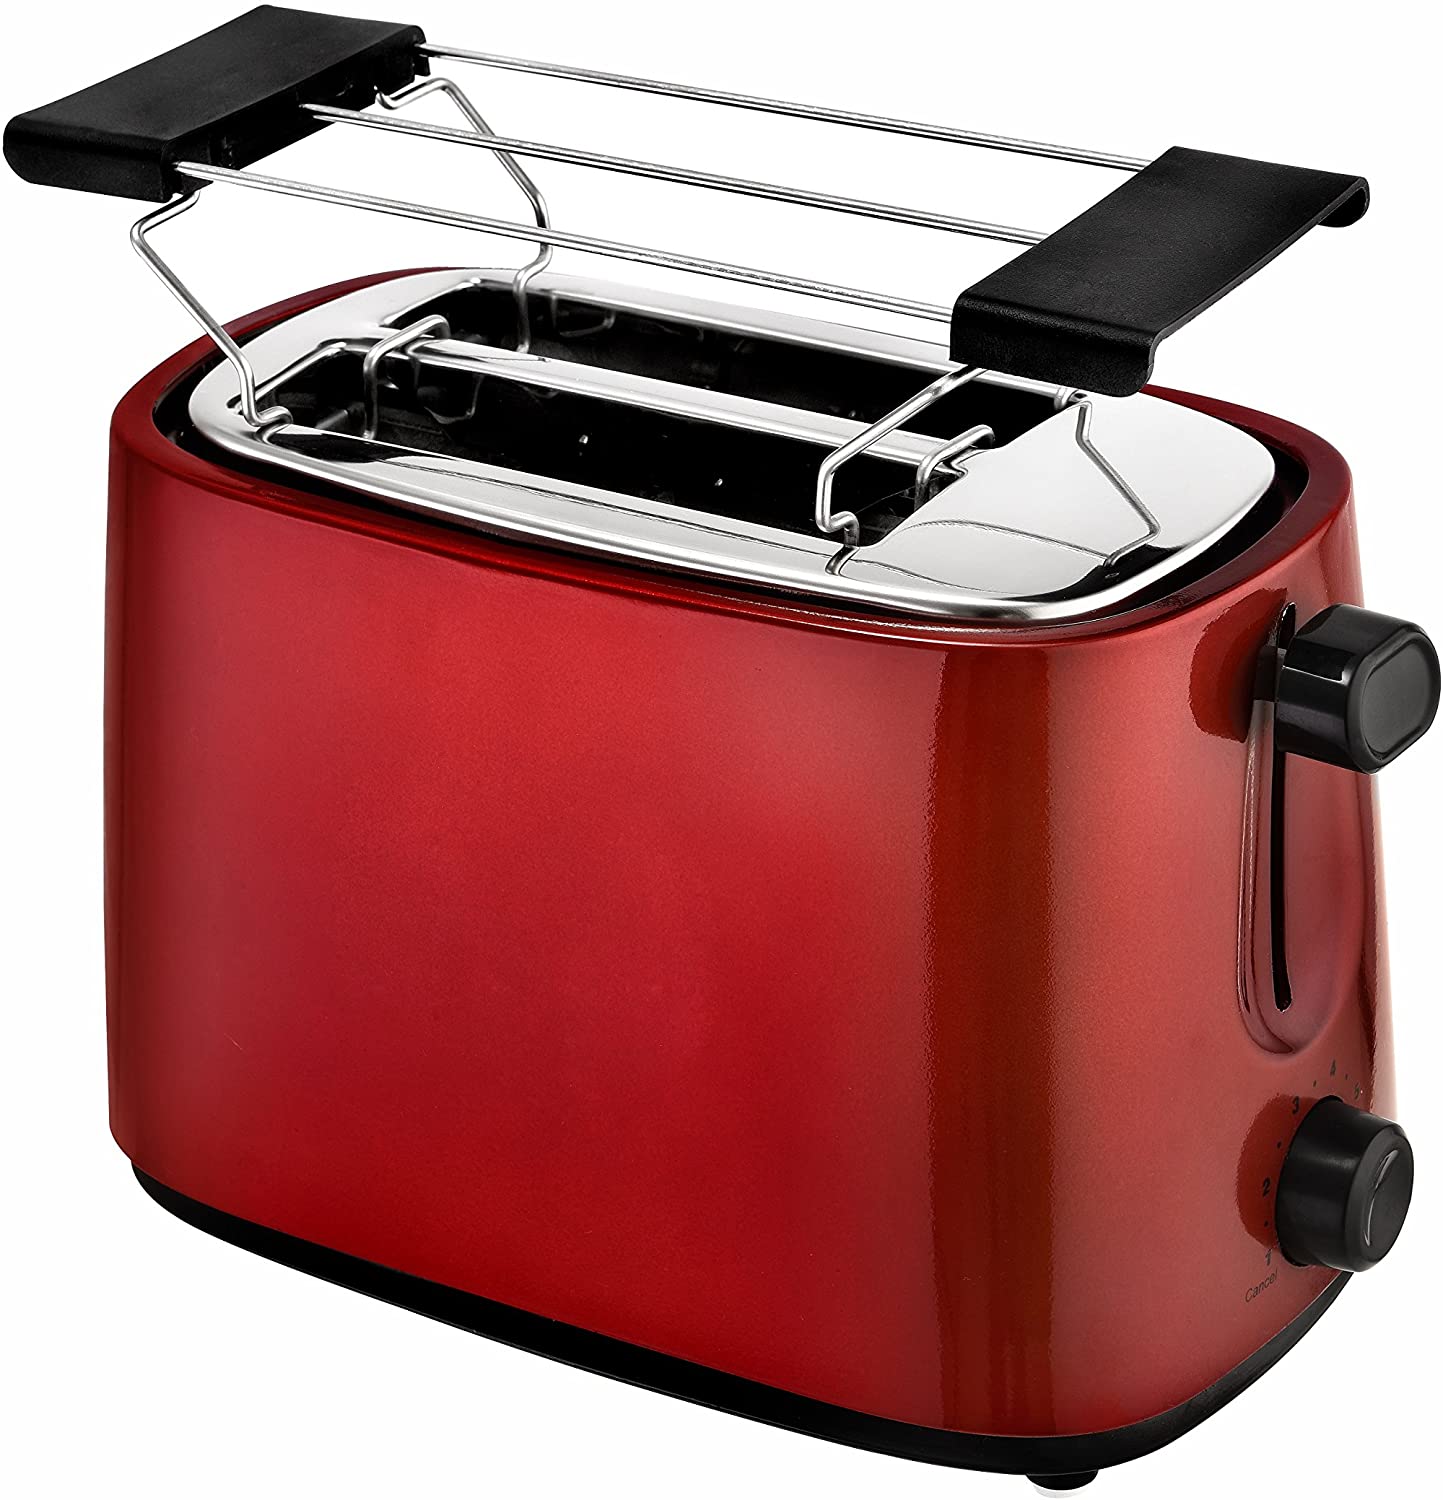 Efbe-Schott SC TO 1060 R Two Slice Toaster, Red